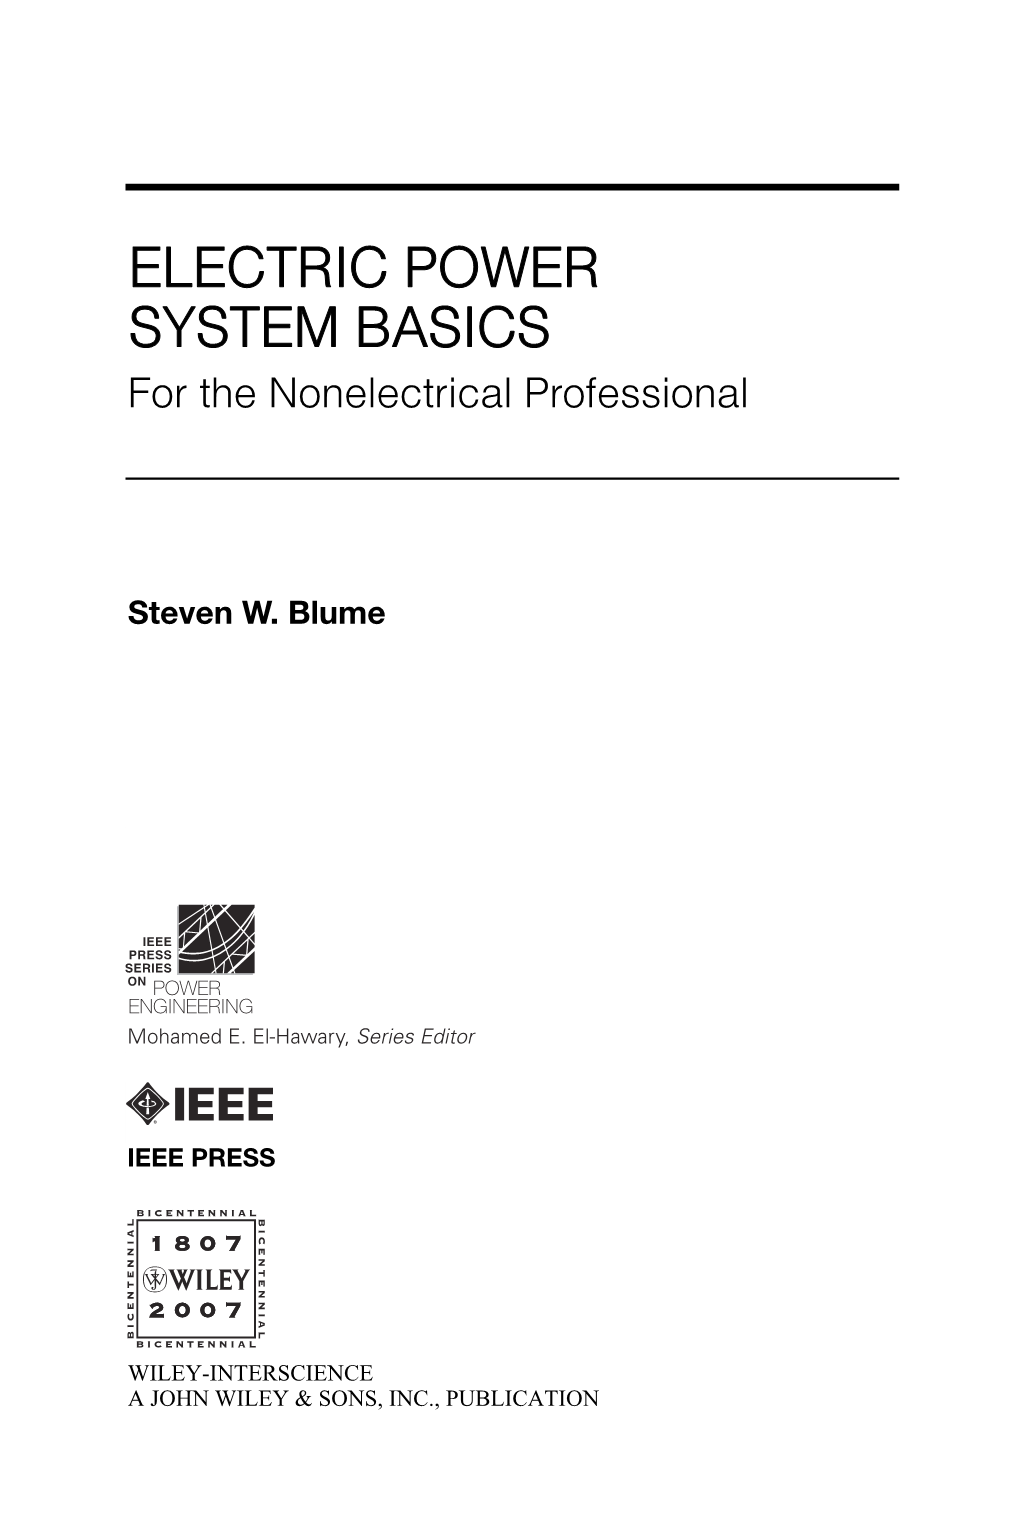 ELECTRIC POWER SYSTEM BASICS for the Nonelectrical Professional